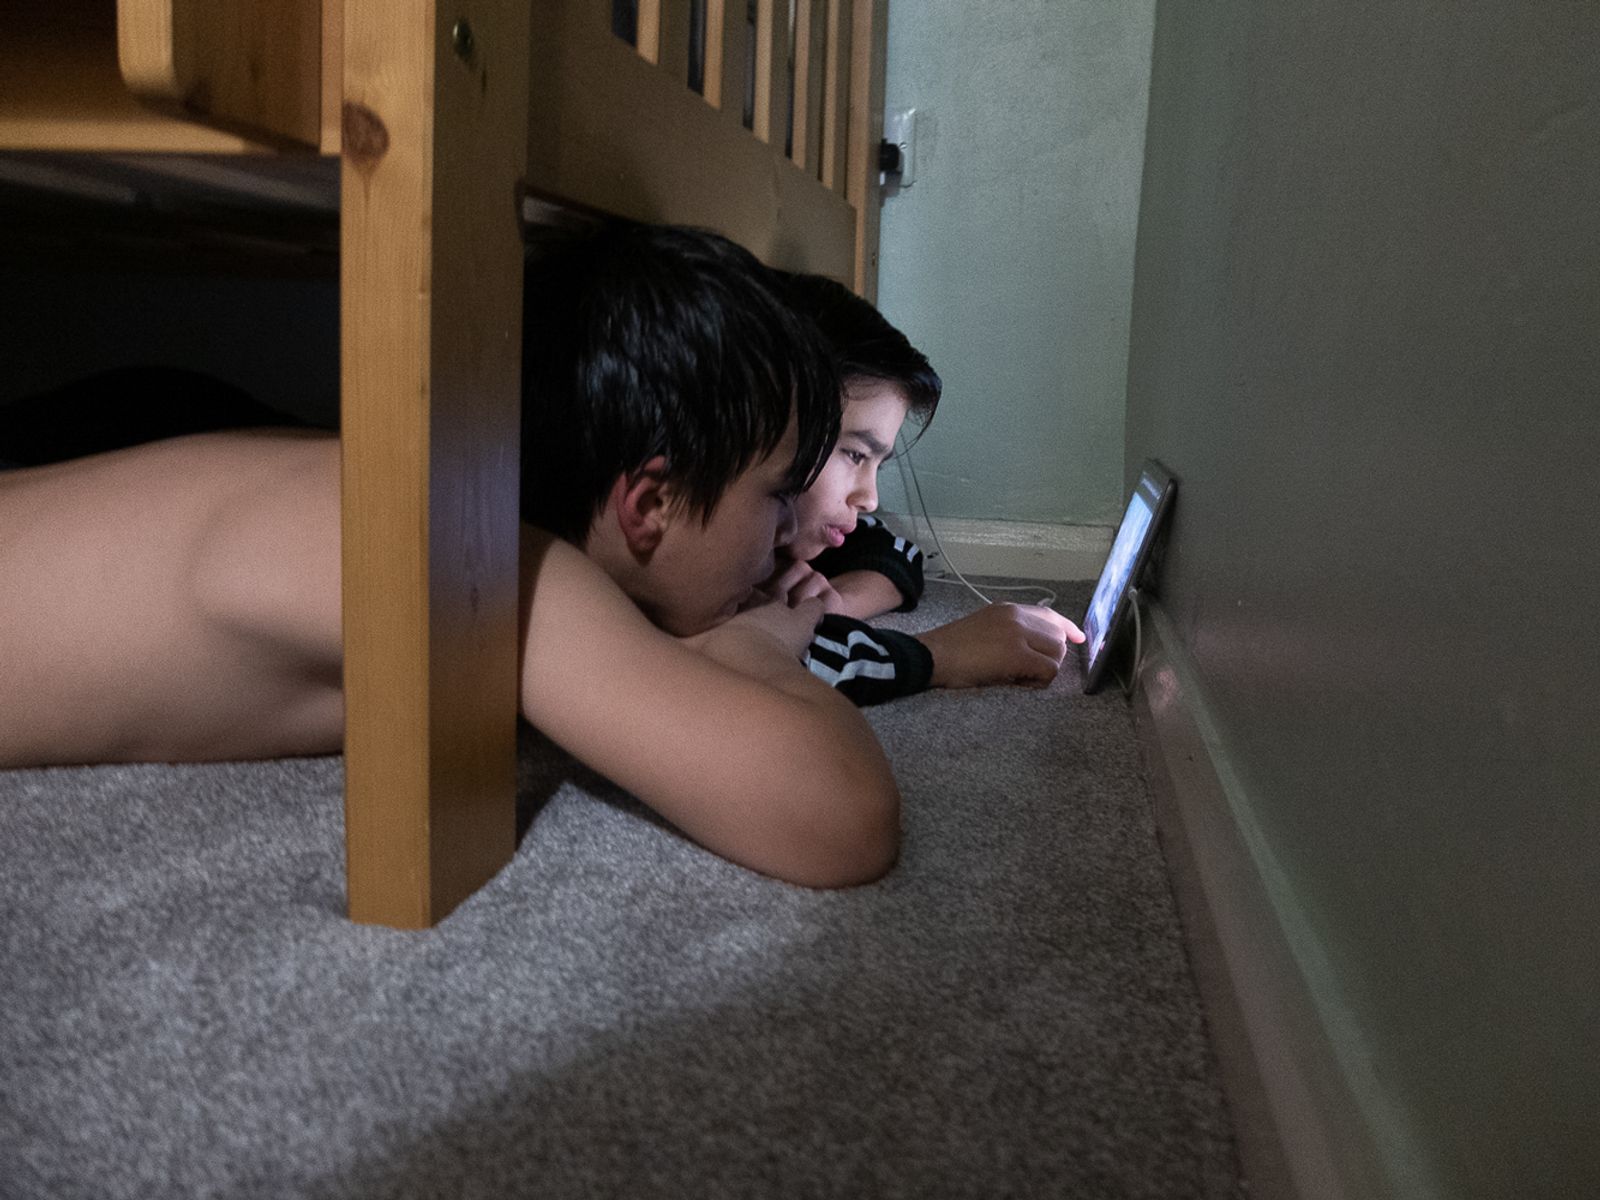 © Rich Wiles - Photo - Ruba al-Hindawi. Mustapha (right) and Yazan watching a tablet under their bed during UK lockdown restrictions.